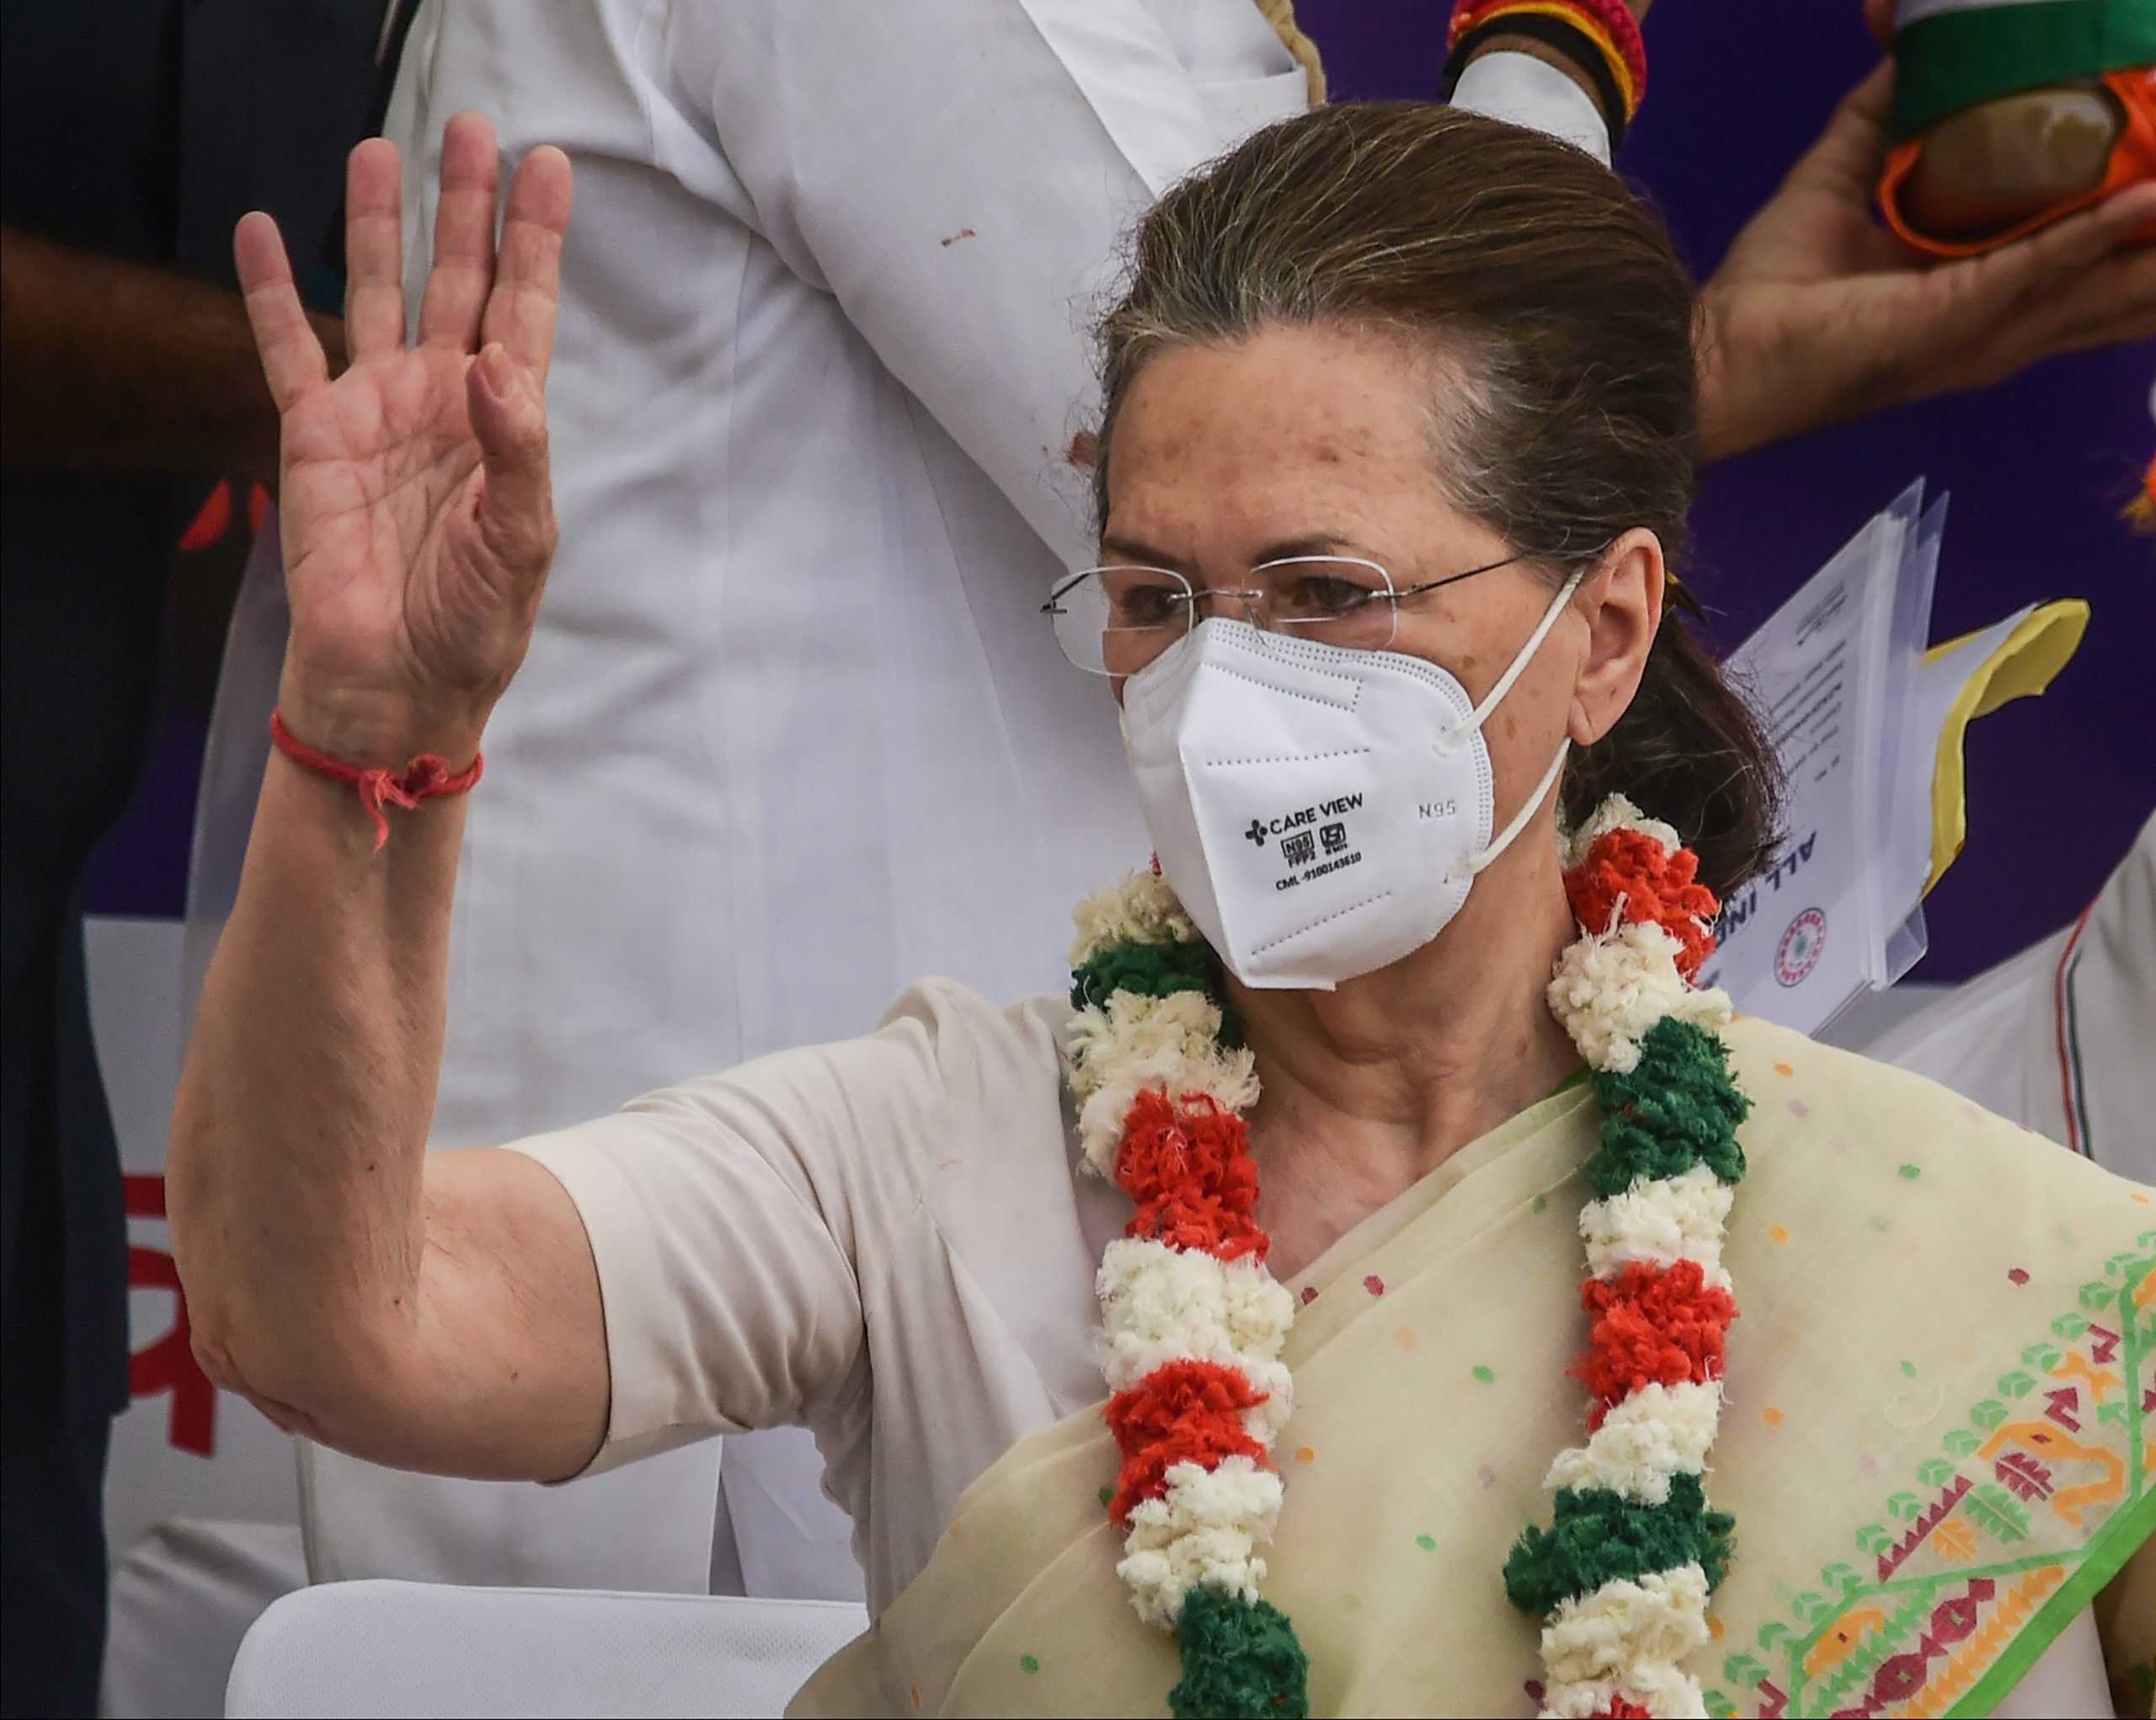 Congress chief Sonia Gandhi’s condition is currently stable: Hospital sources